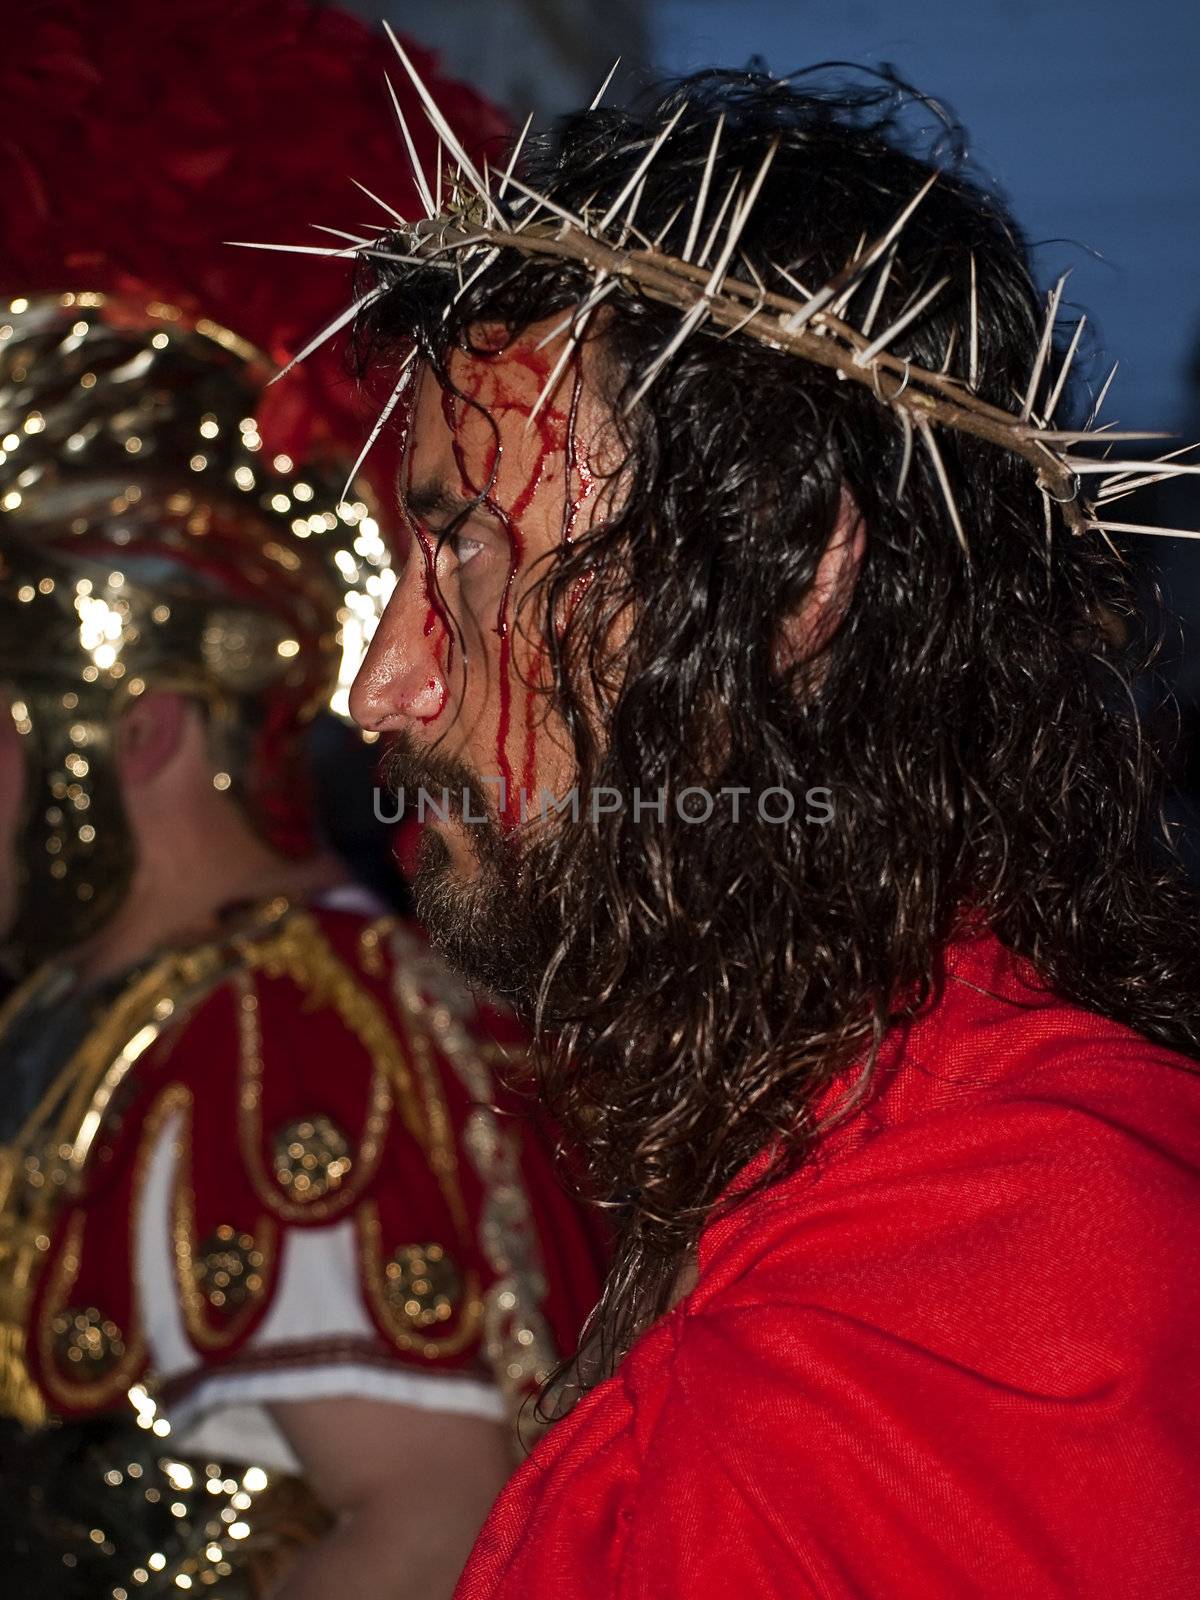 Passion of the Christ by PhotoWorks